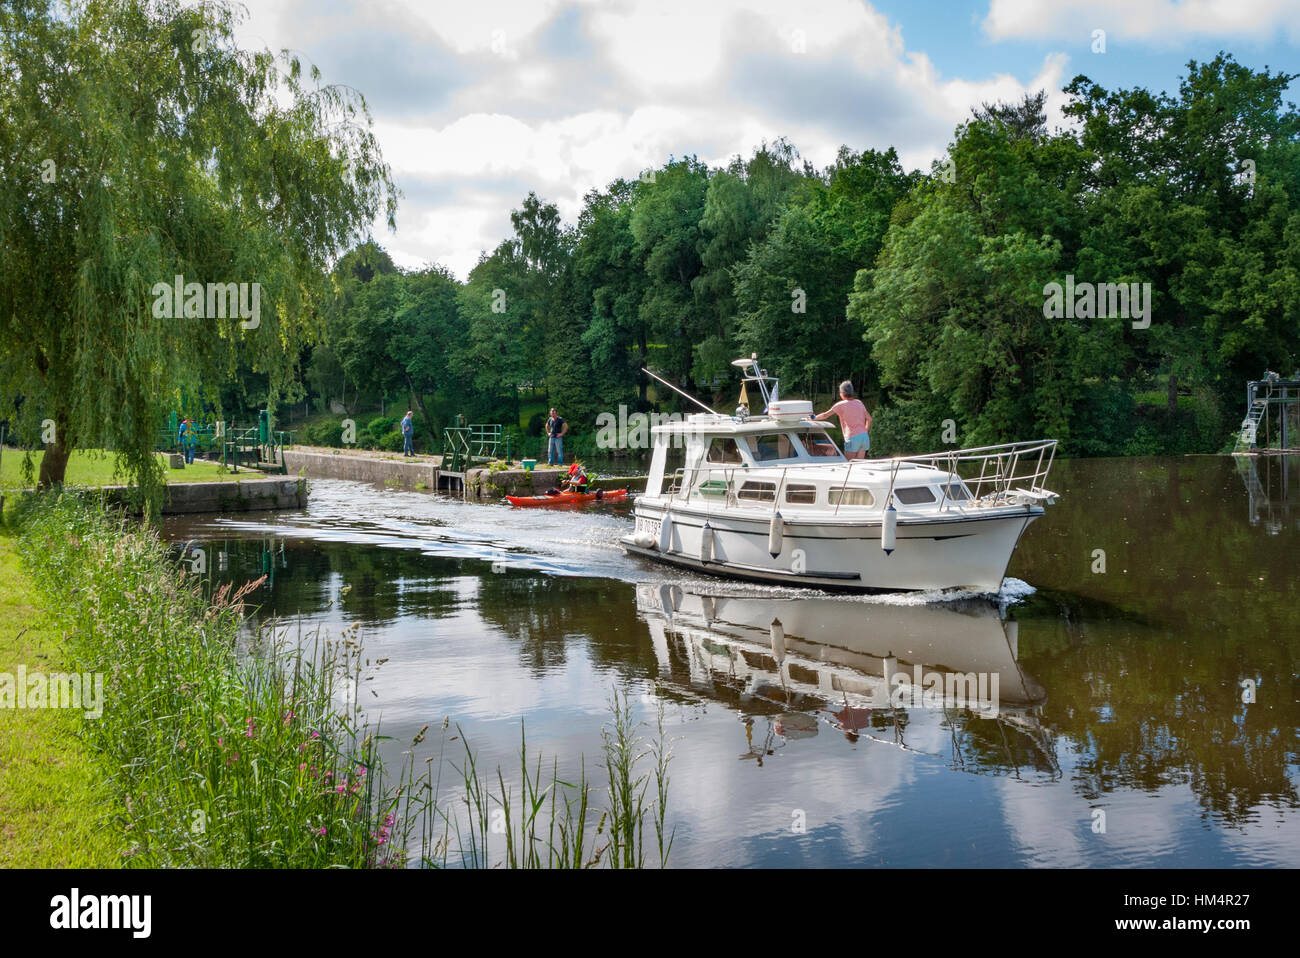 Nantes Brest canal Brittany France. Stock Photo